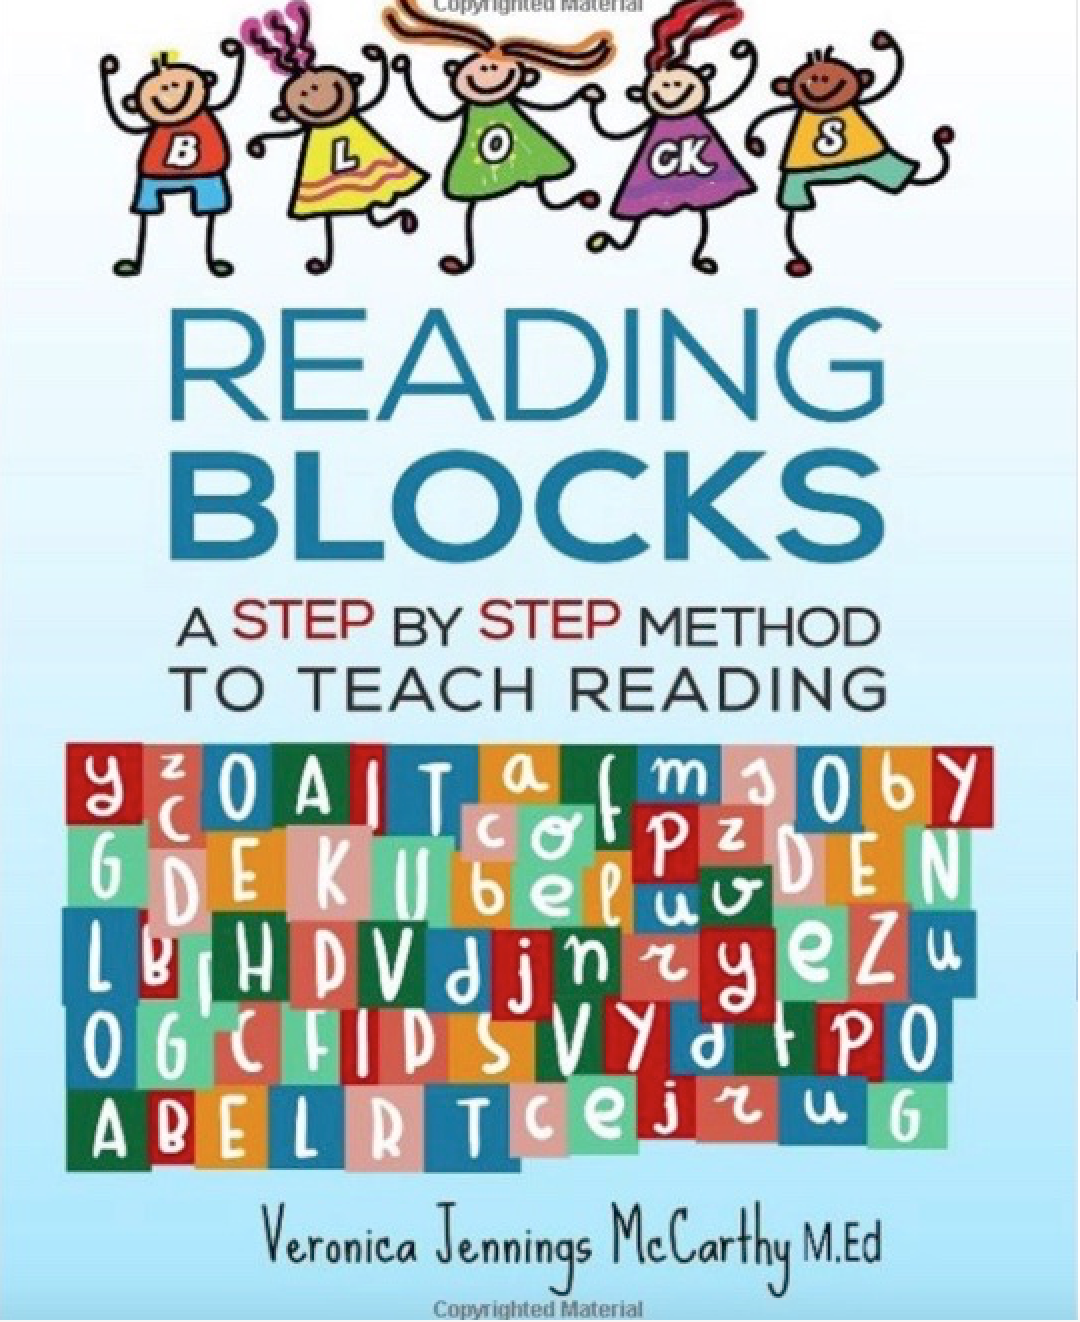 Reading Blocks: A Step By Step Method to Teach Reading